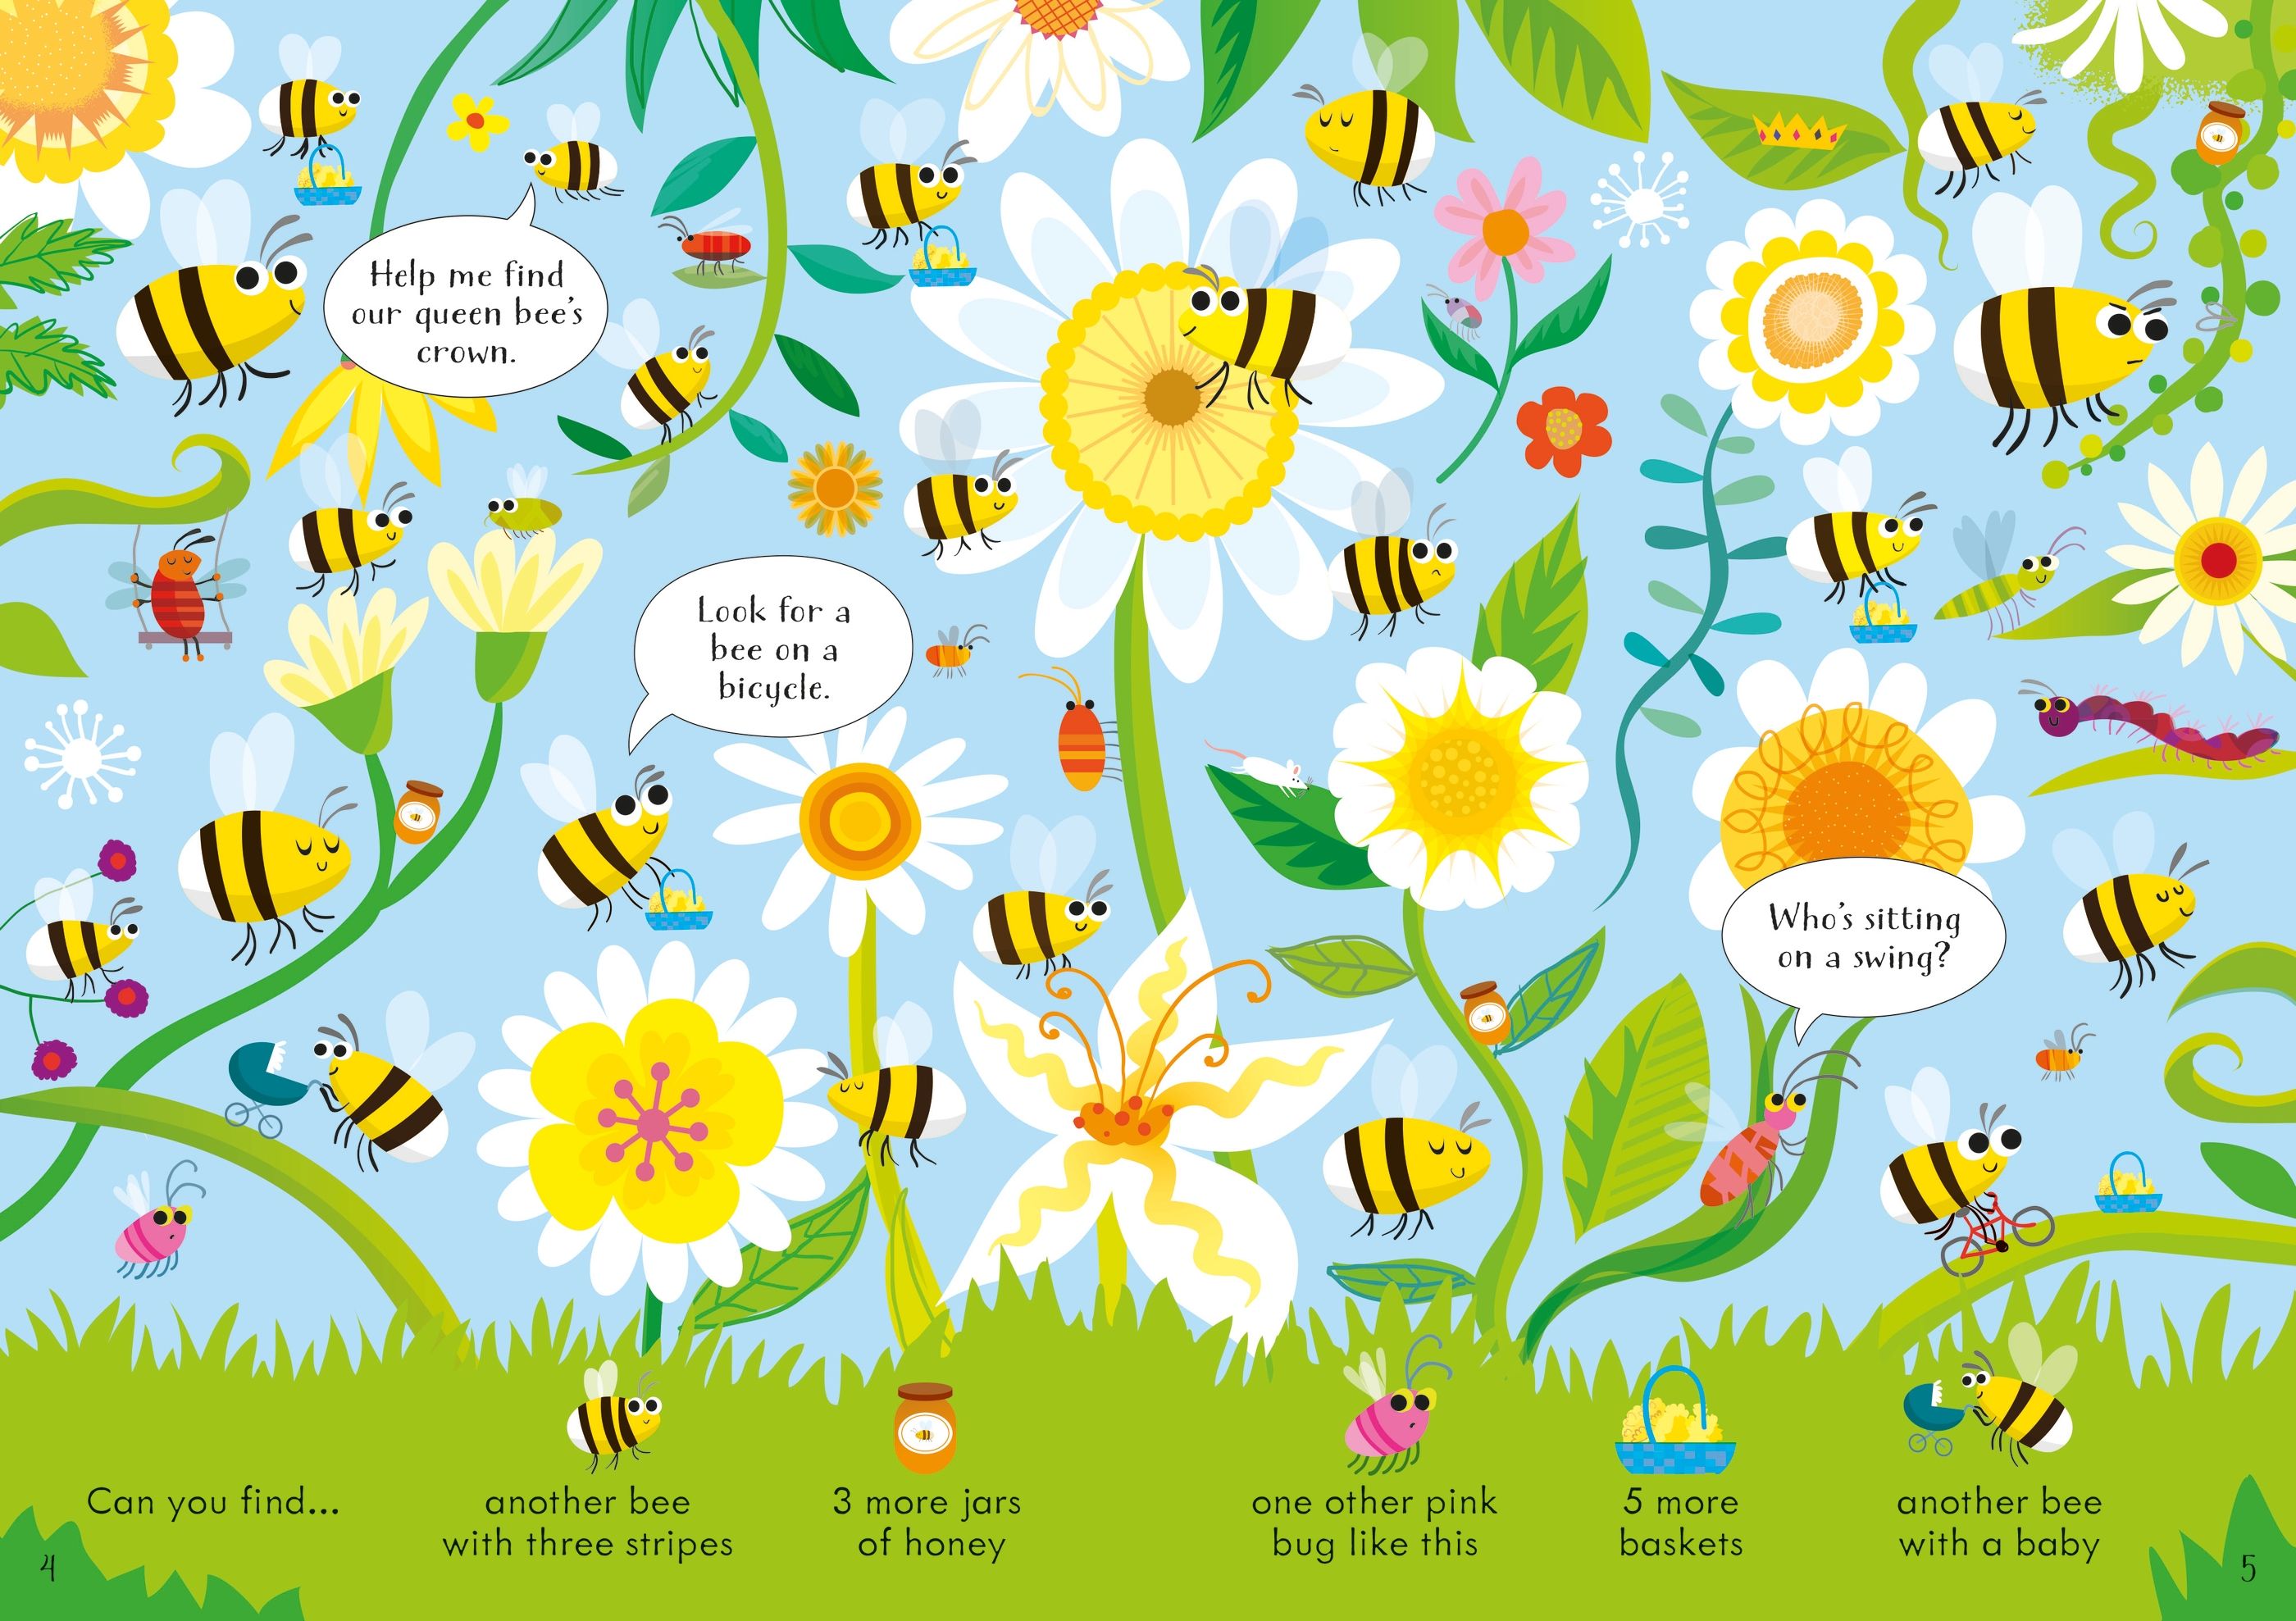 Usborne Books | Look and Find Puzzles - Bugs